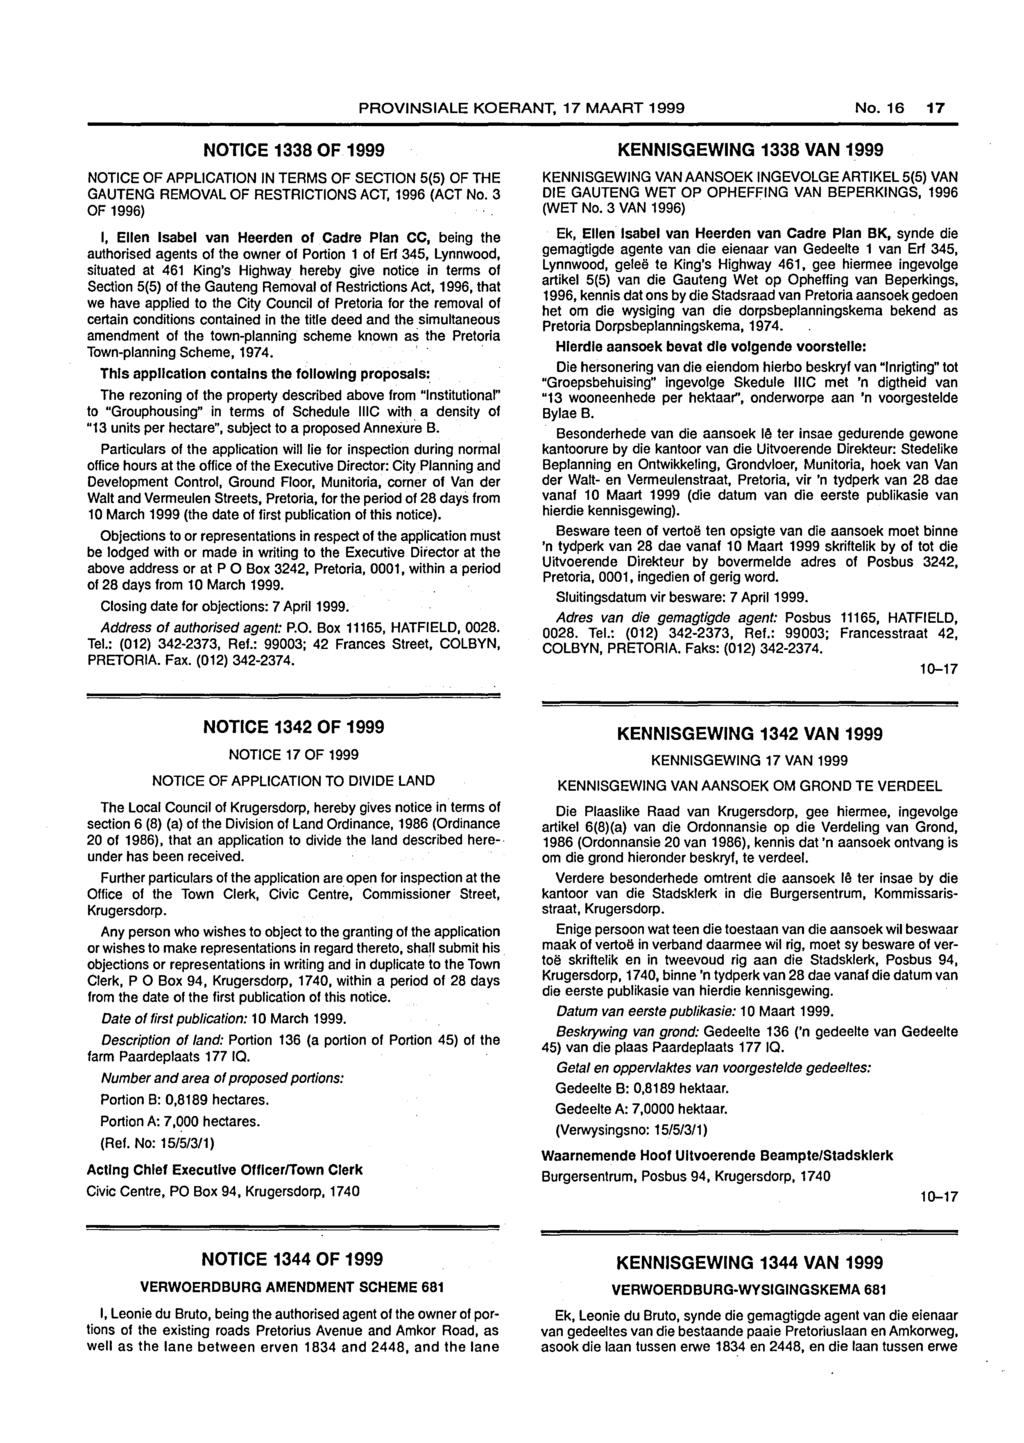 PROVINSIALE KOERANT, 17 MAART 1999 No. 16 17 NOTICE 1338 OF 1999 NOTICE OF APPLICATION IN TERMS OF SECTION 5(5) OF THE GAUTENG REMOVAL OF RESTRICTIONS ACT, 1996 (ACT No.